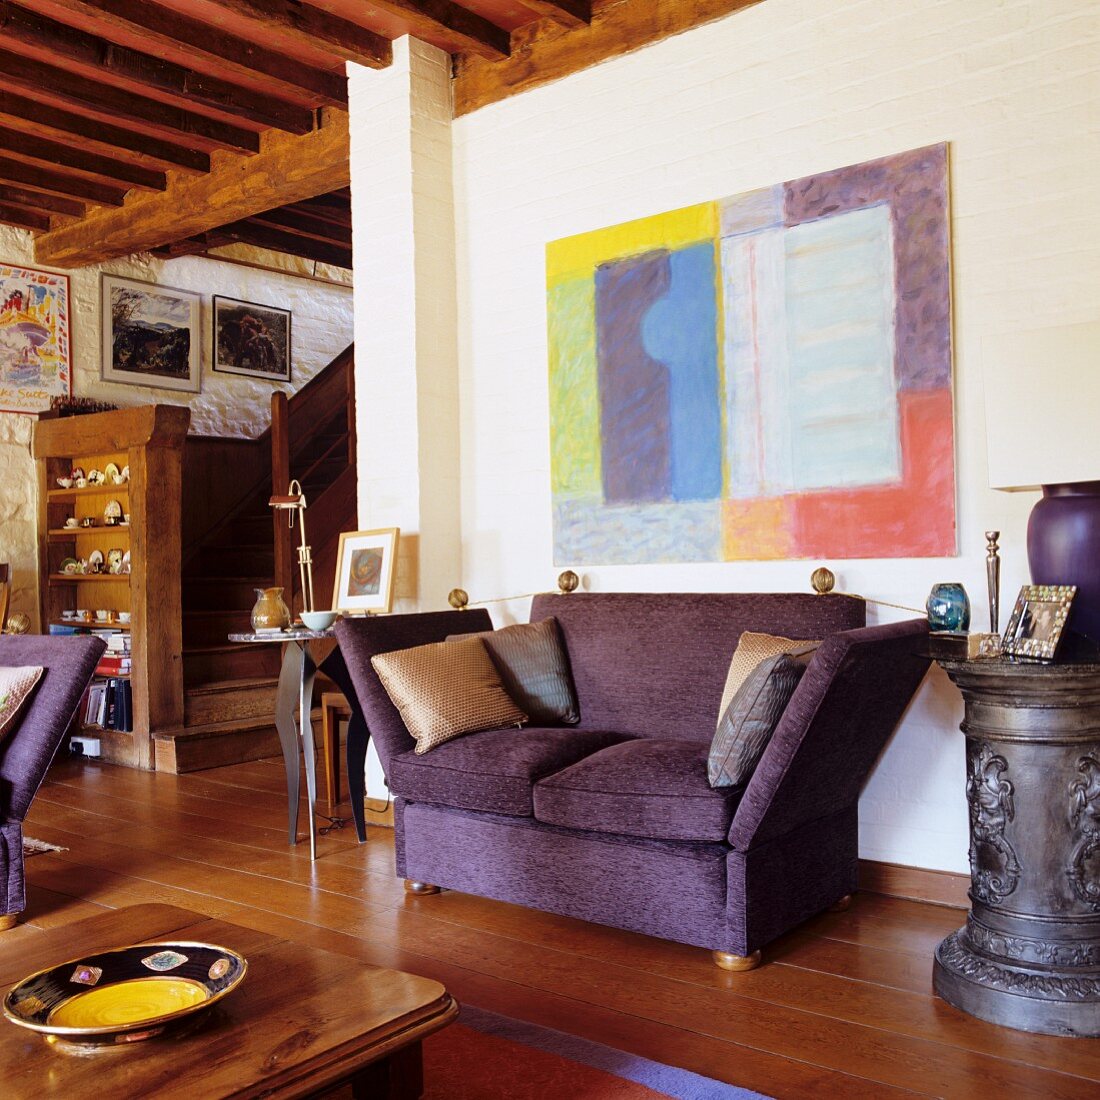 Purple sofa below modern artwork on wall in open-plan interior with wood-beamed ceiling